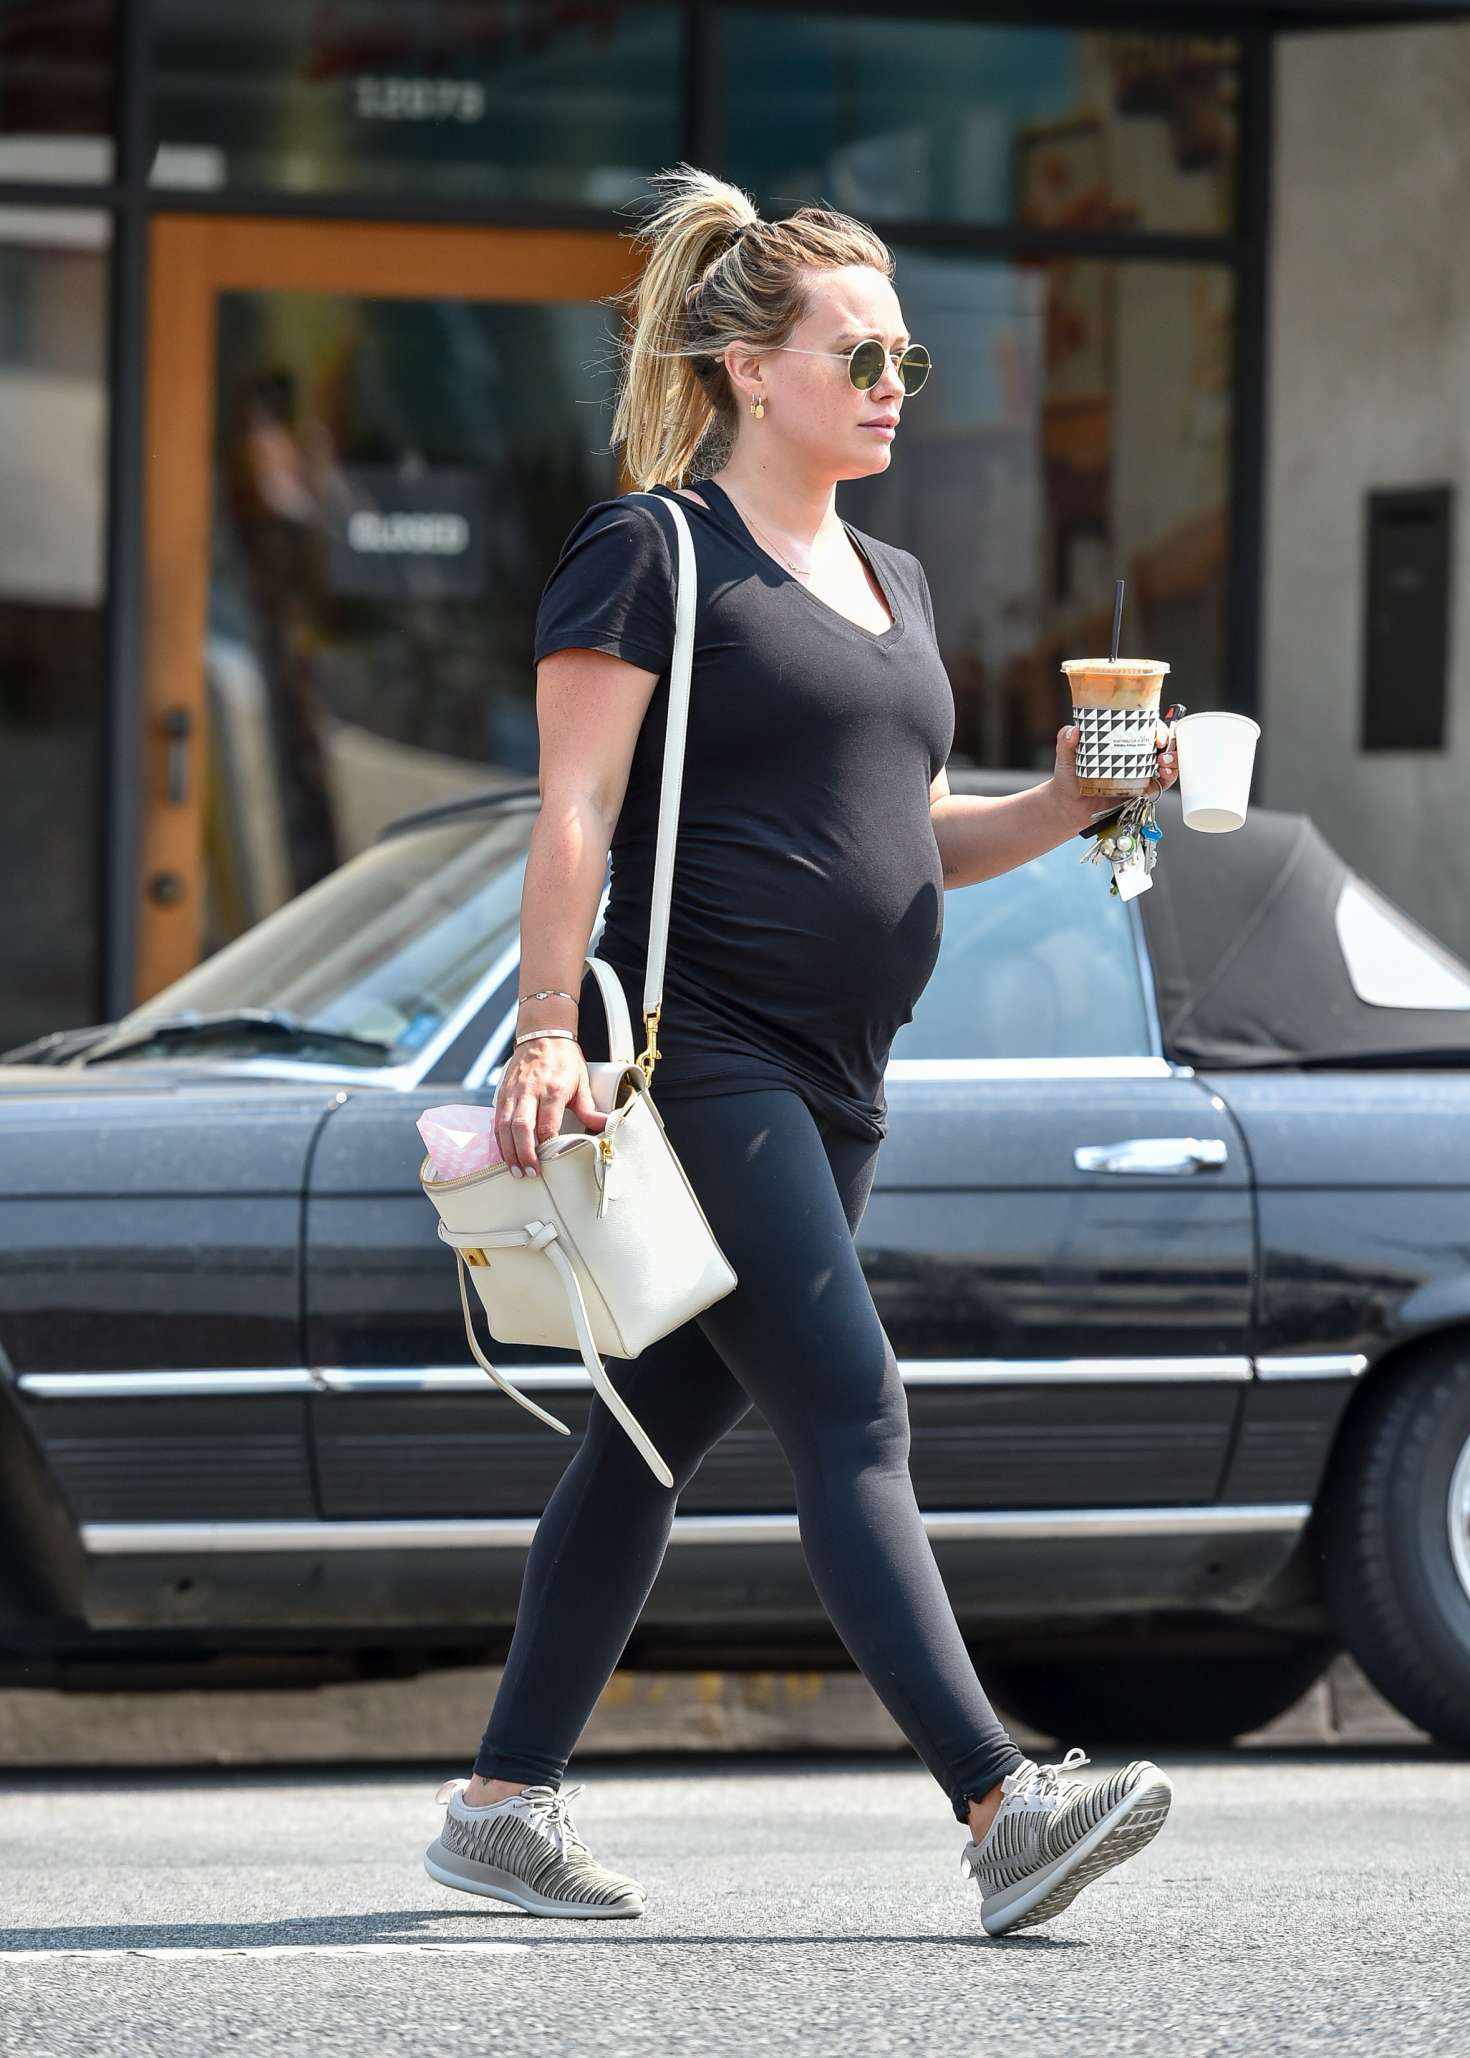 Hilary Duff in Black Outfit â€“ Out in Studio City